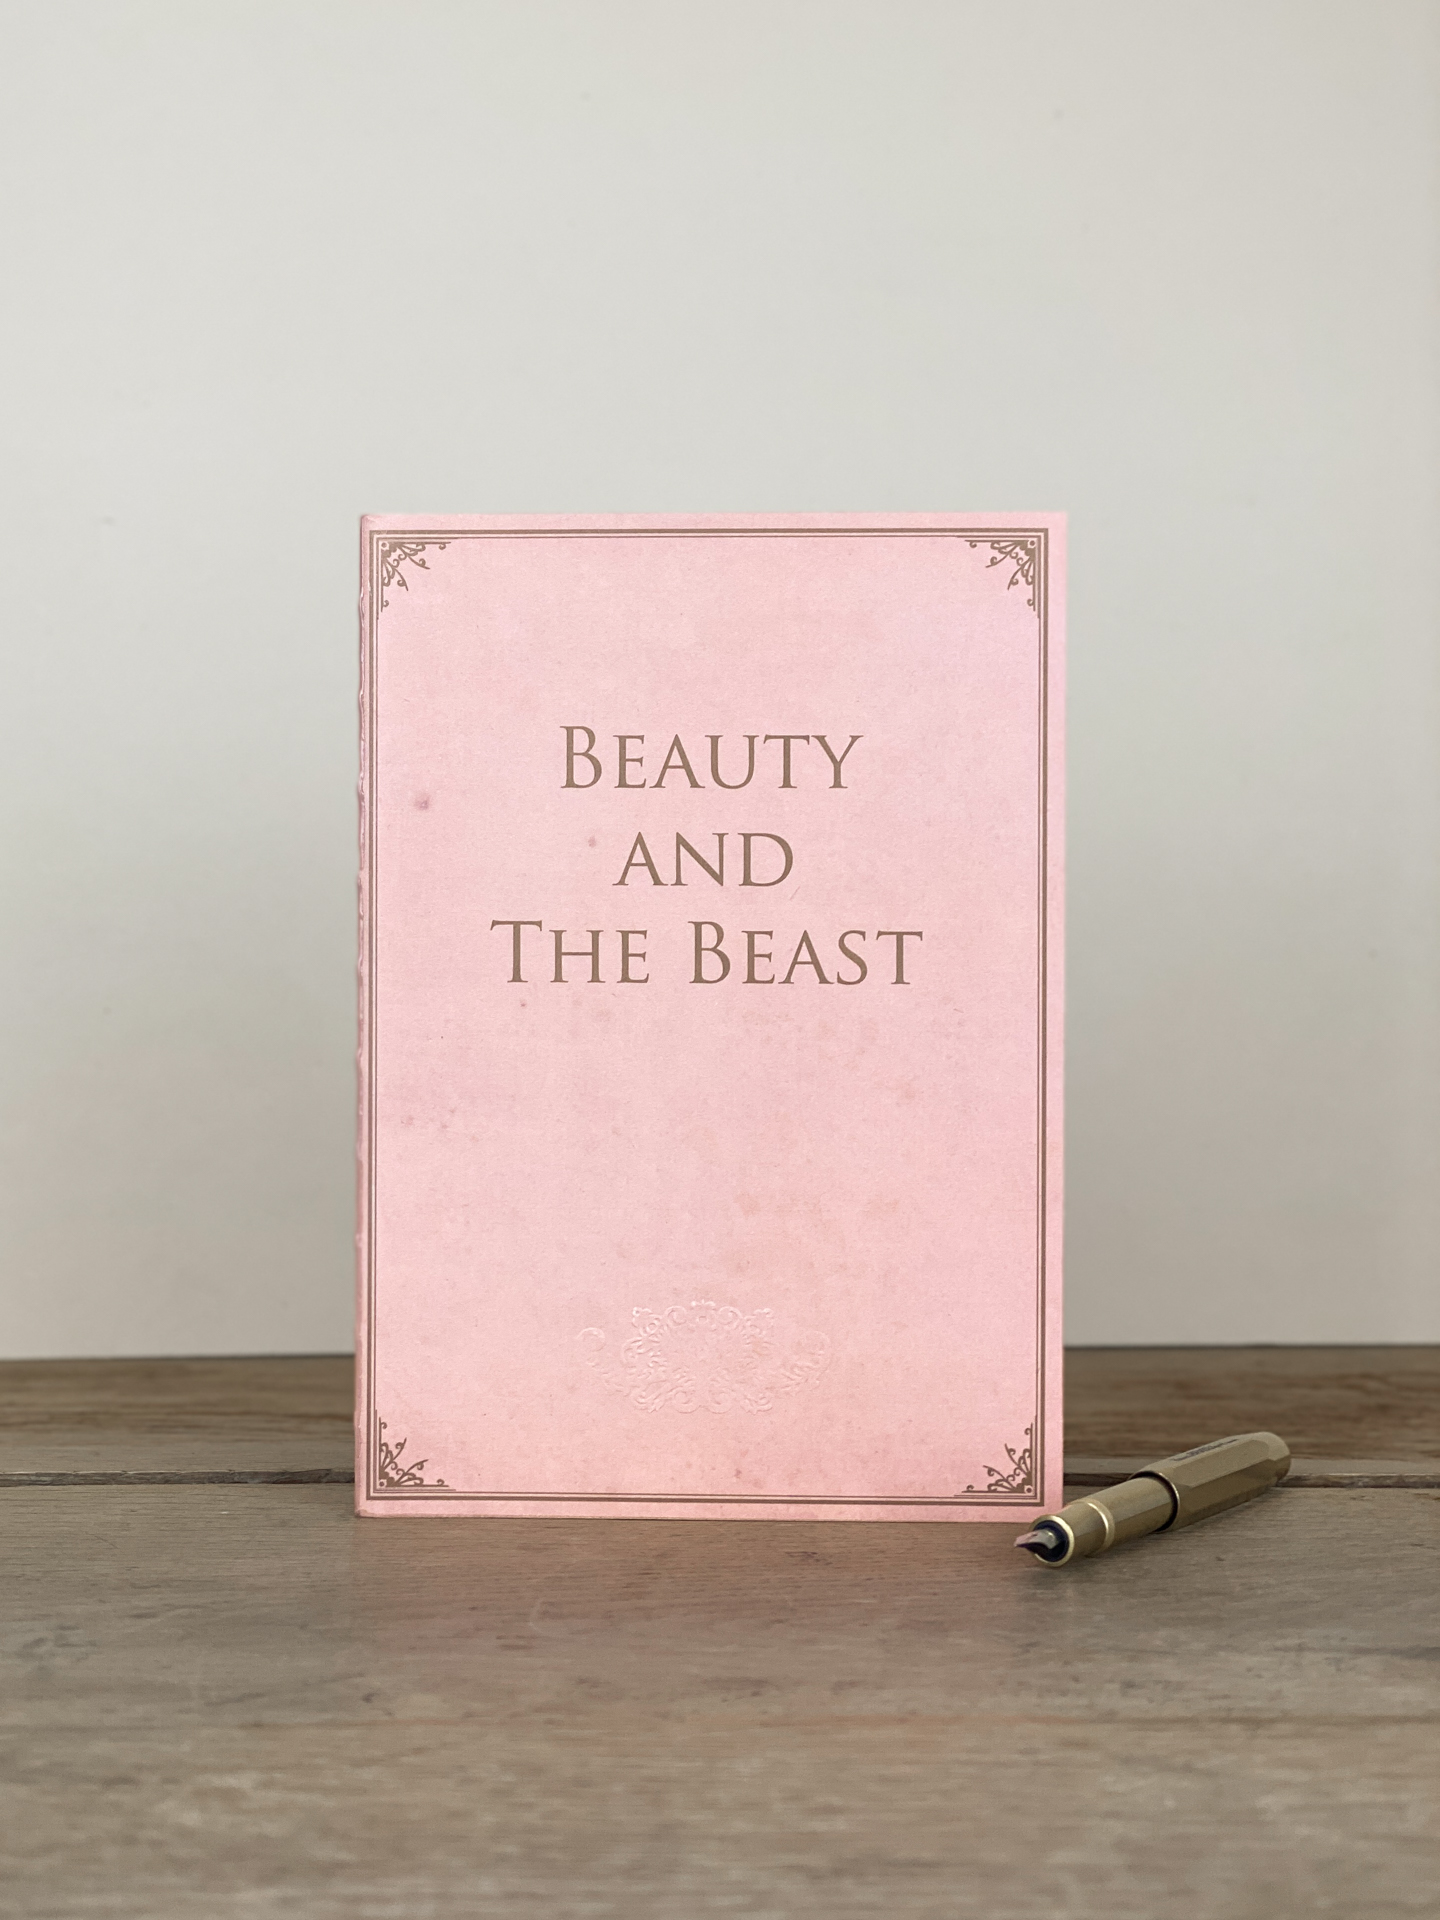 Notizbuch Beauty and the beast